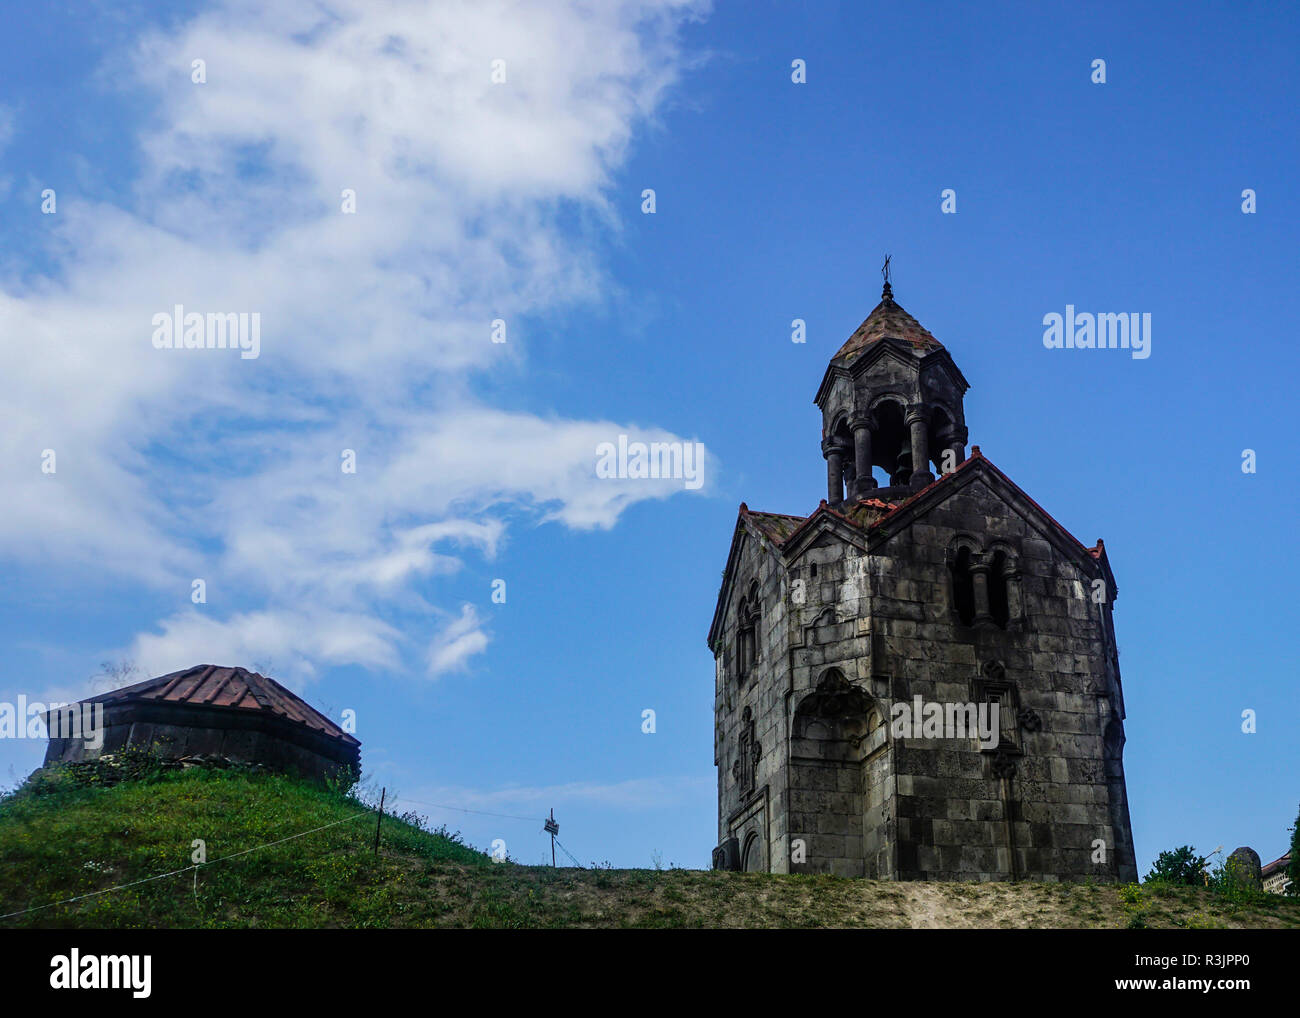 Haghpatavank Monastery Bell Tower on Hill in Summer with Blue Sky Stock Photo